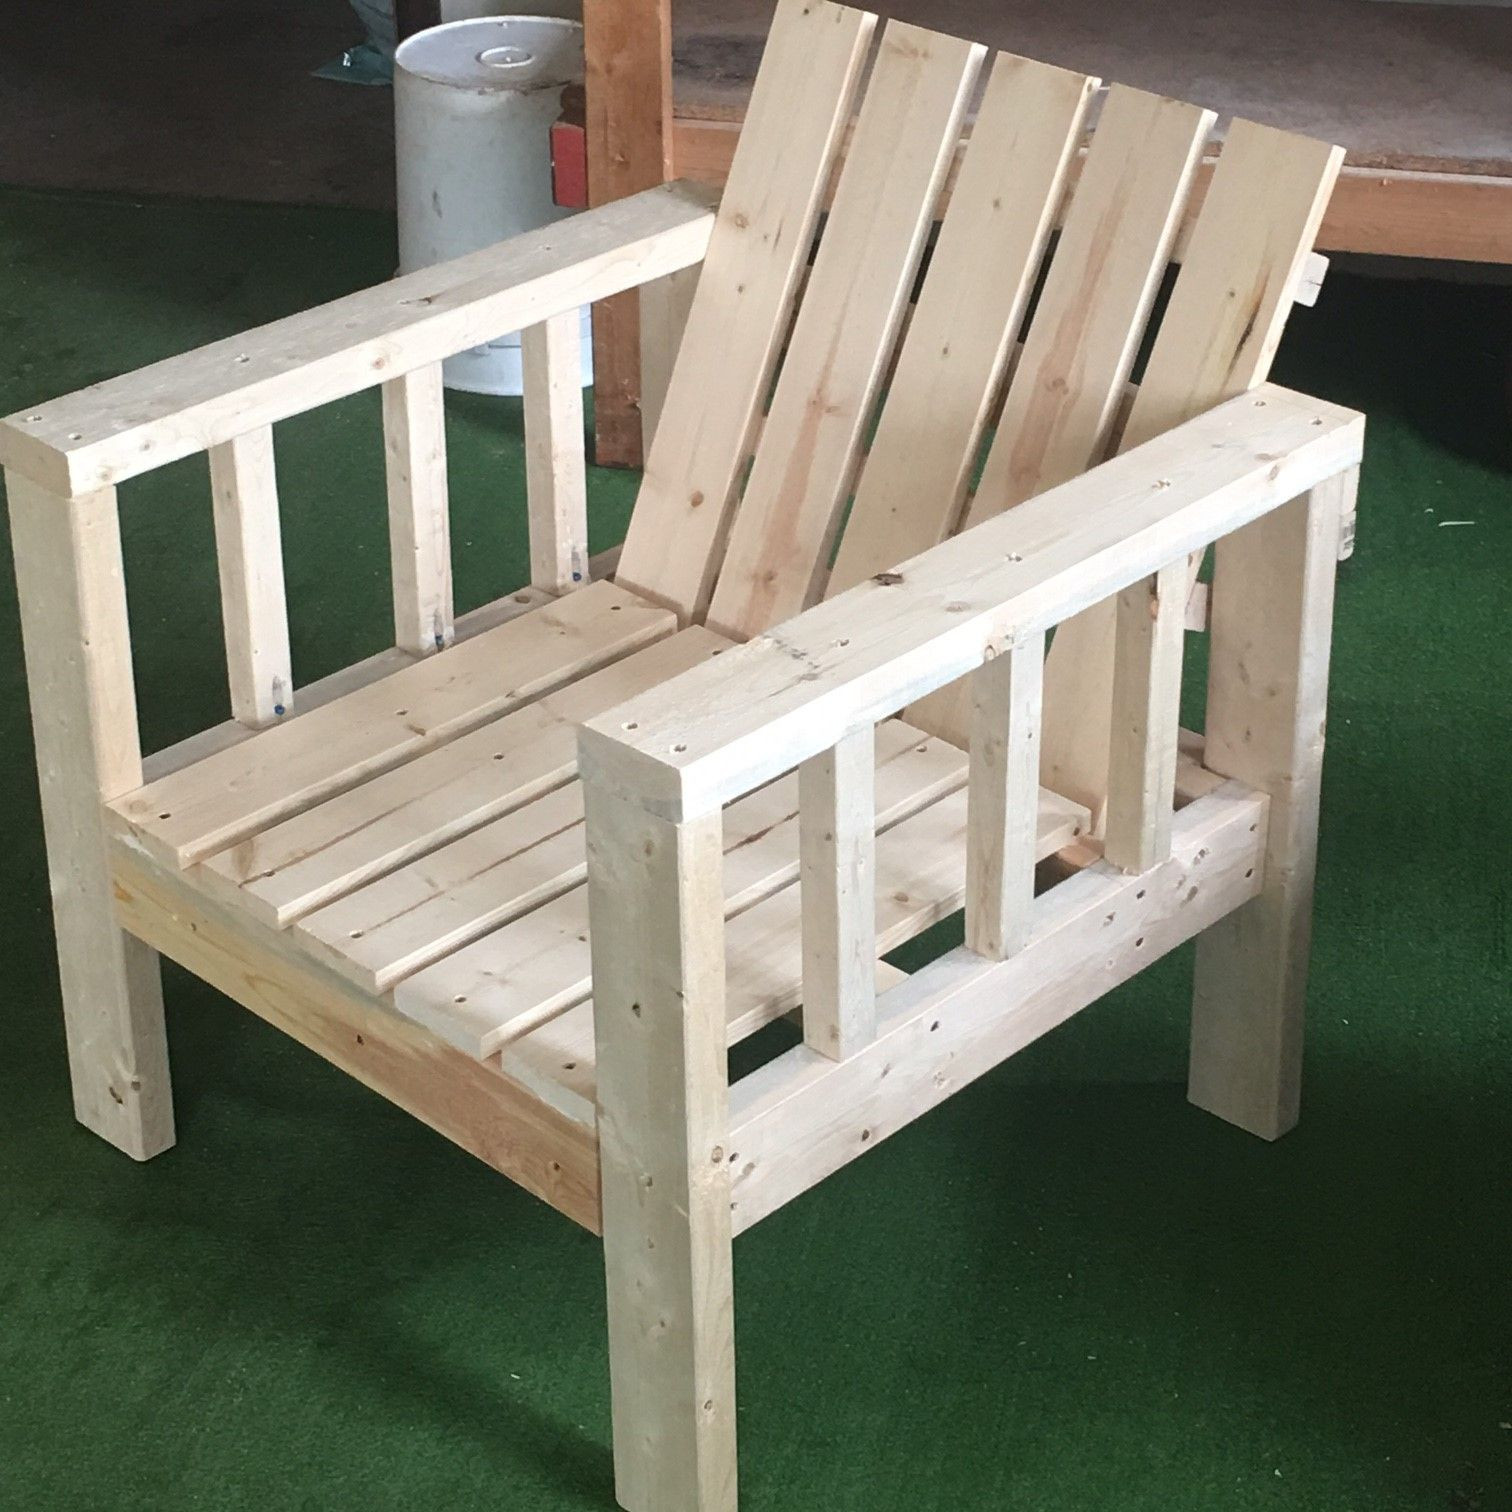 DIY Outdoor Chair
 Tips for Making Your Own Outdoor Furniture